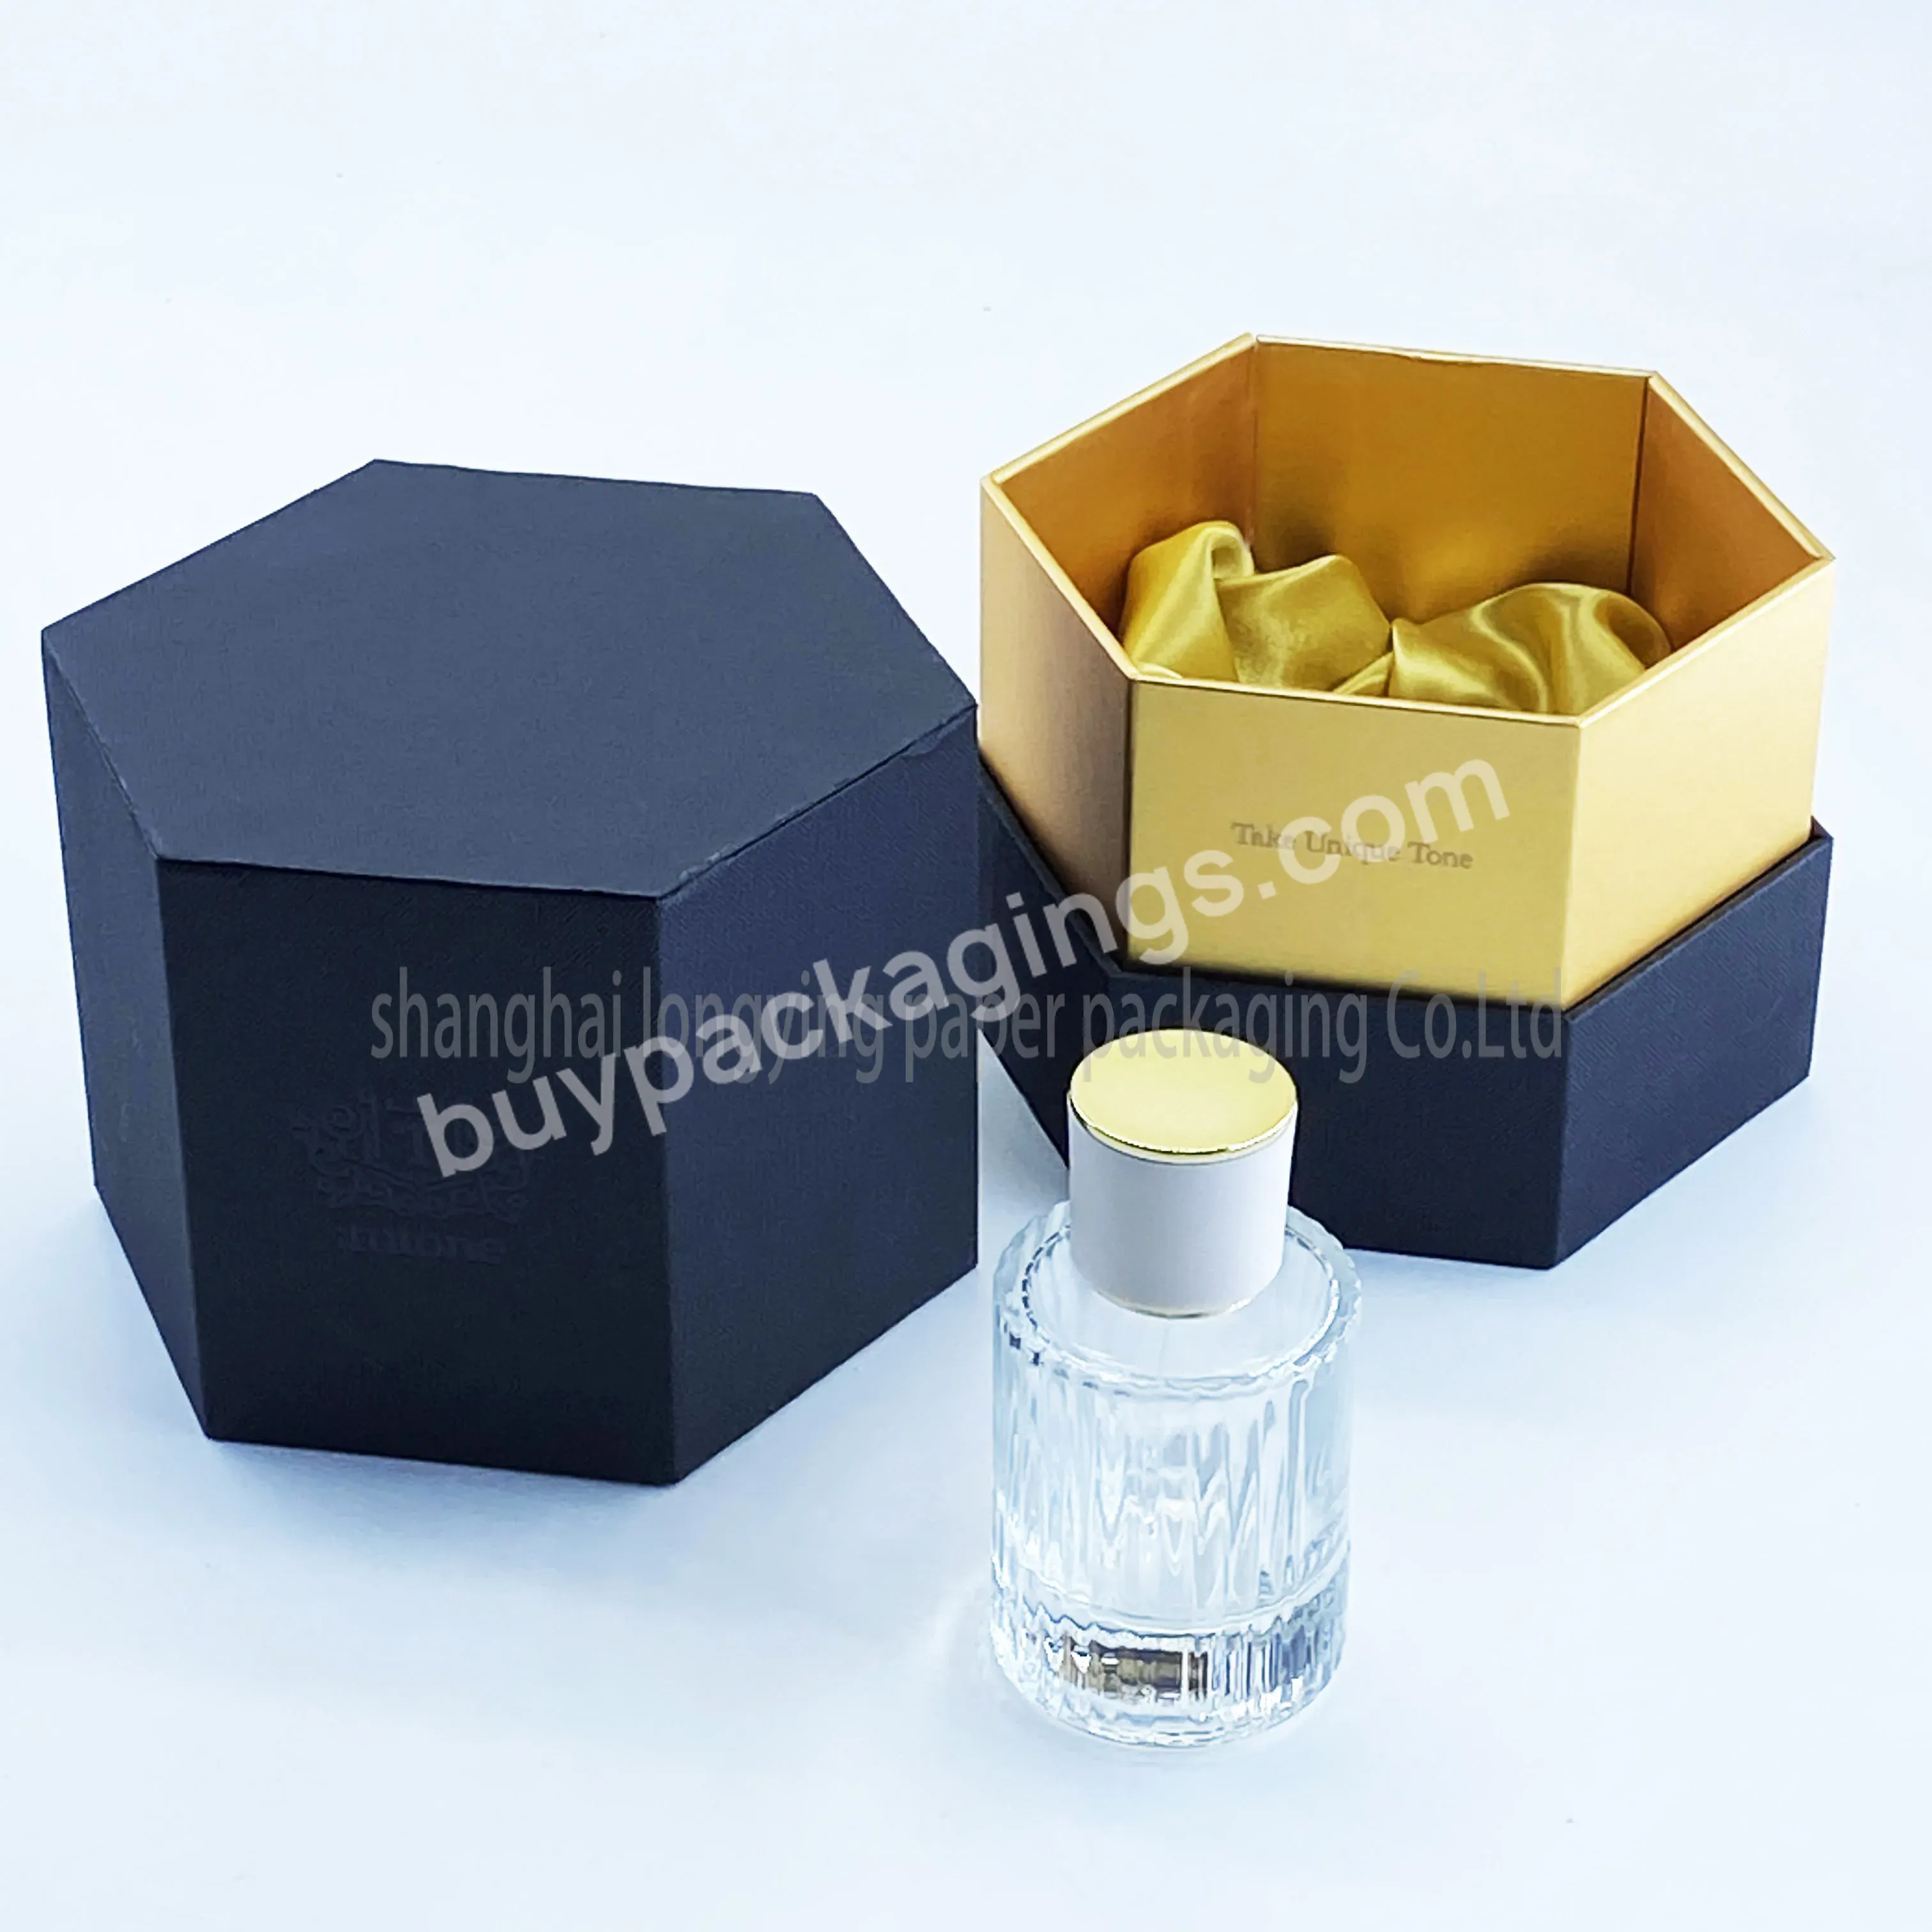 New Arrival Cylinder 50 100ml Screw Thread Empty Perfume Bottle With Box Cardboard Perfume Boxes Packaging And Label Sticker - Buy New Arrival Cylinder 50 100ml Screw Thread Empty Perfume Bottle,Box Cardboard Perfume Boxes Packaging,Label Sticker.